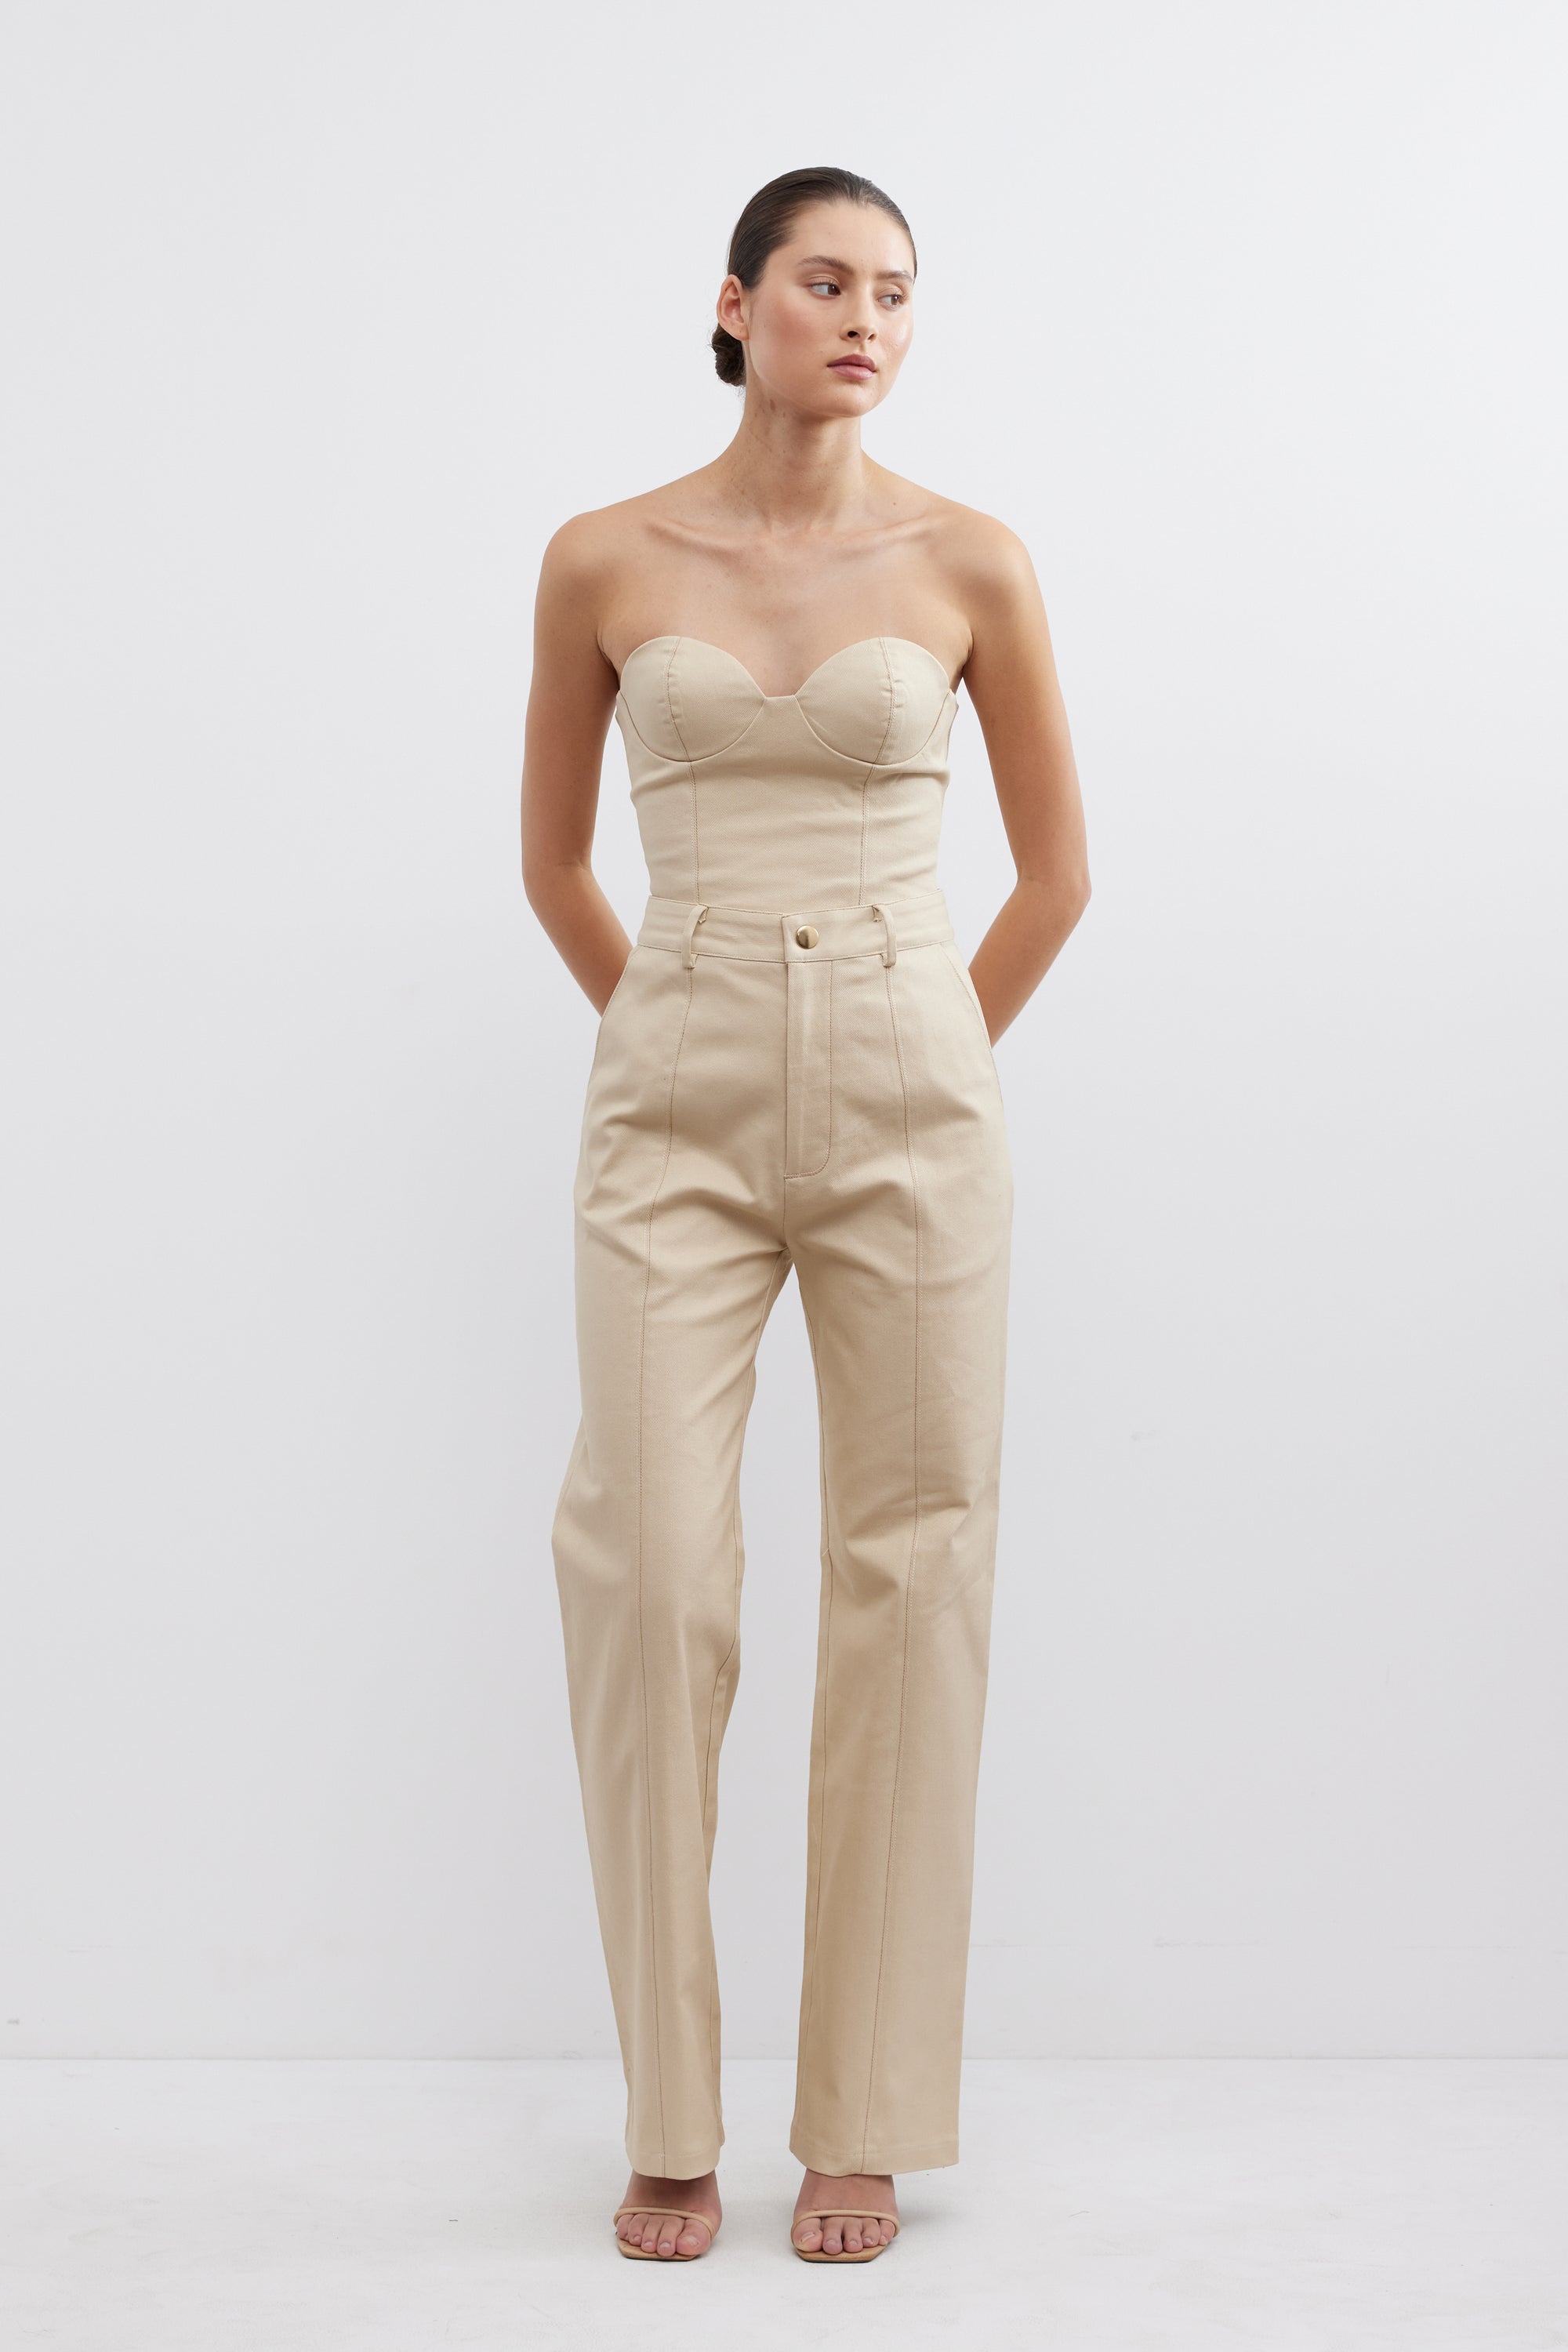 Aldo Pant - TAKE 40% OFF DISCOUNT APPLIED AT CHECKOUT